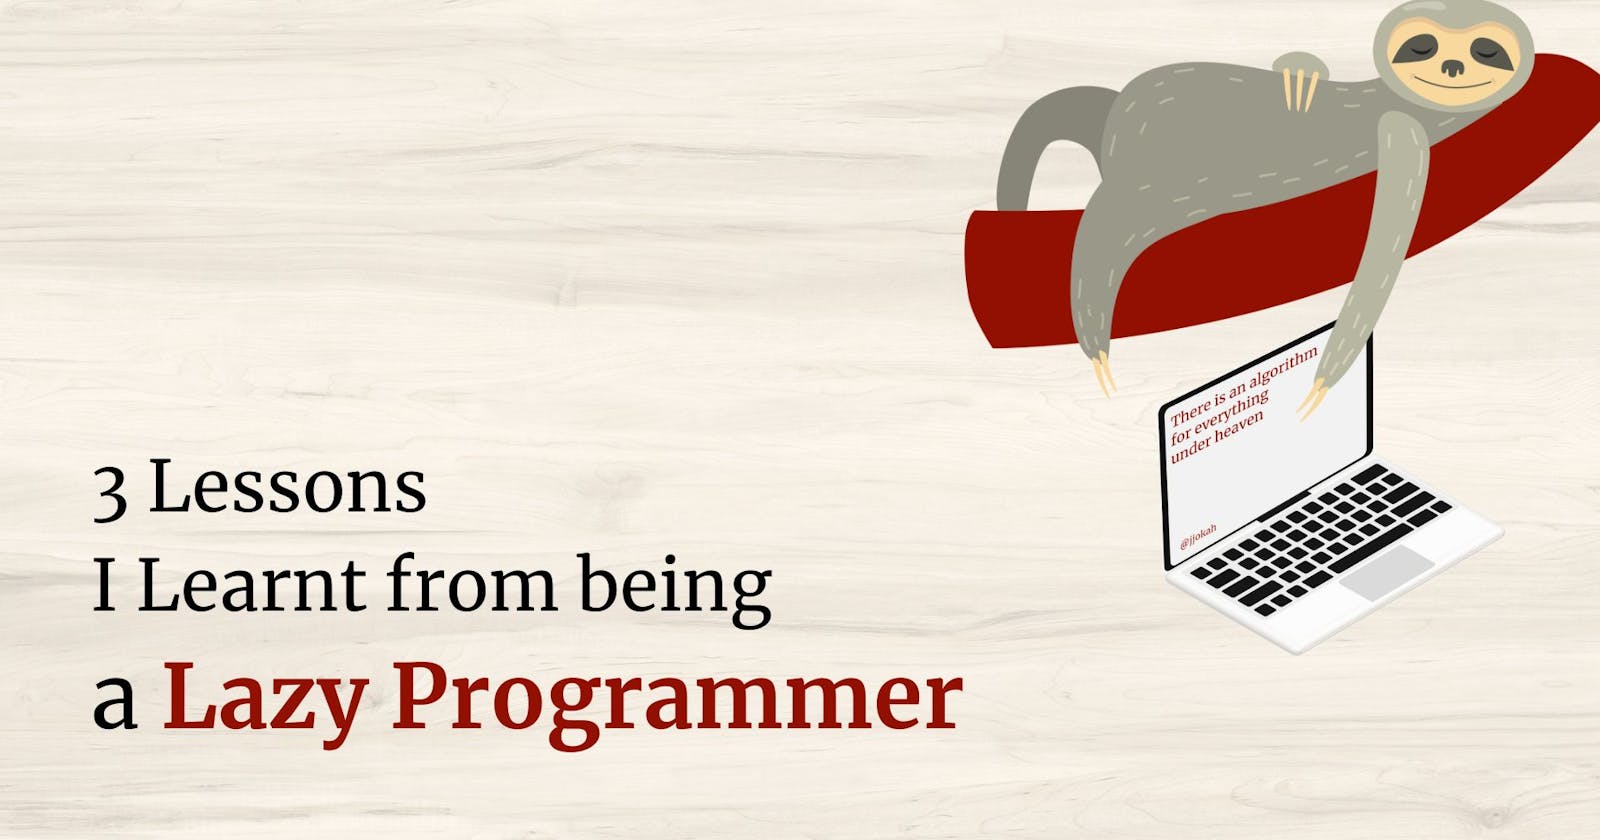 3 Lessons I Learnt from being a Lazy Programmer